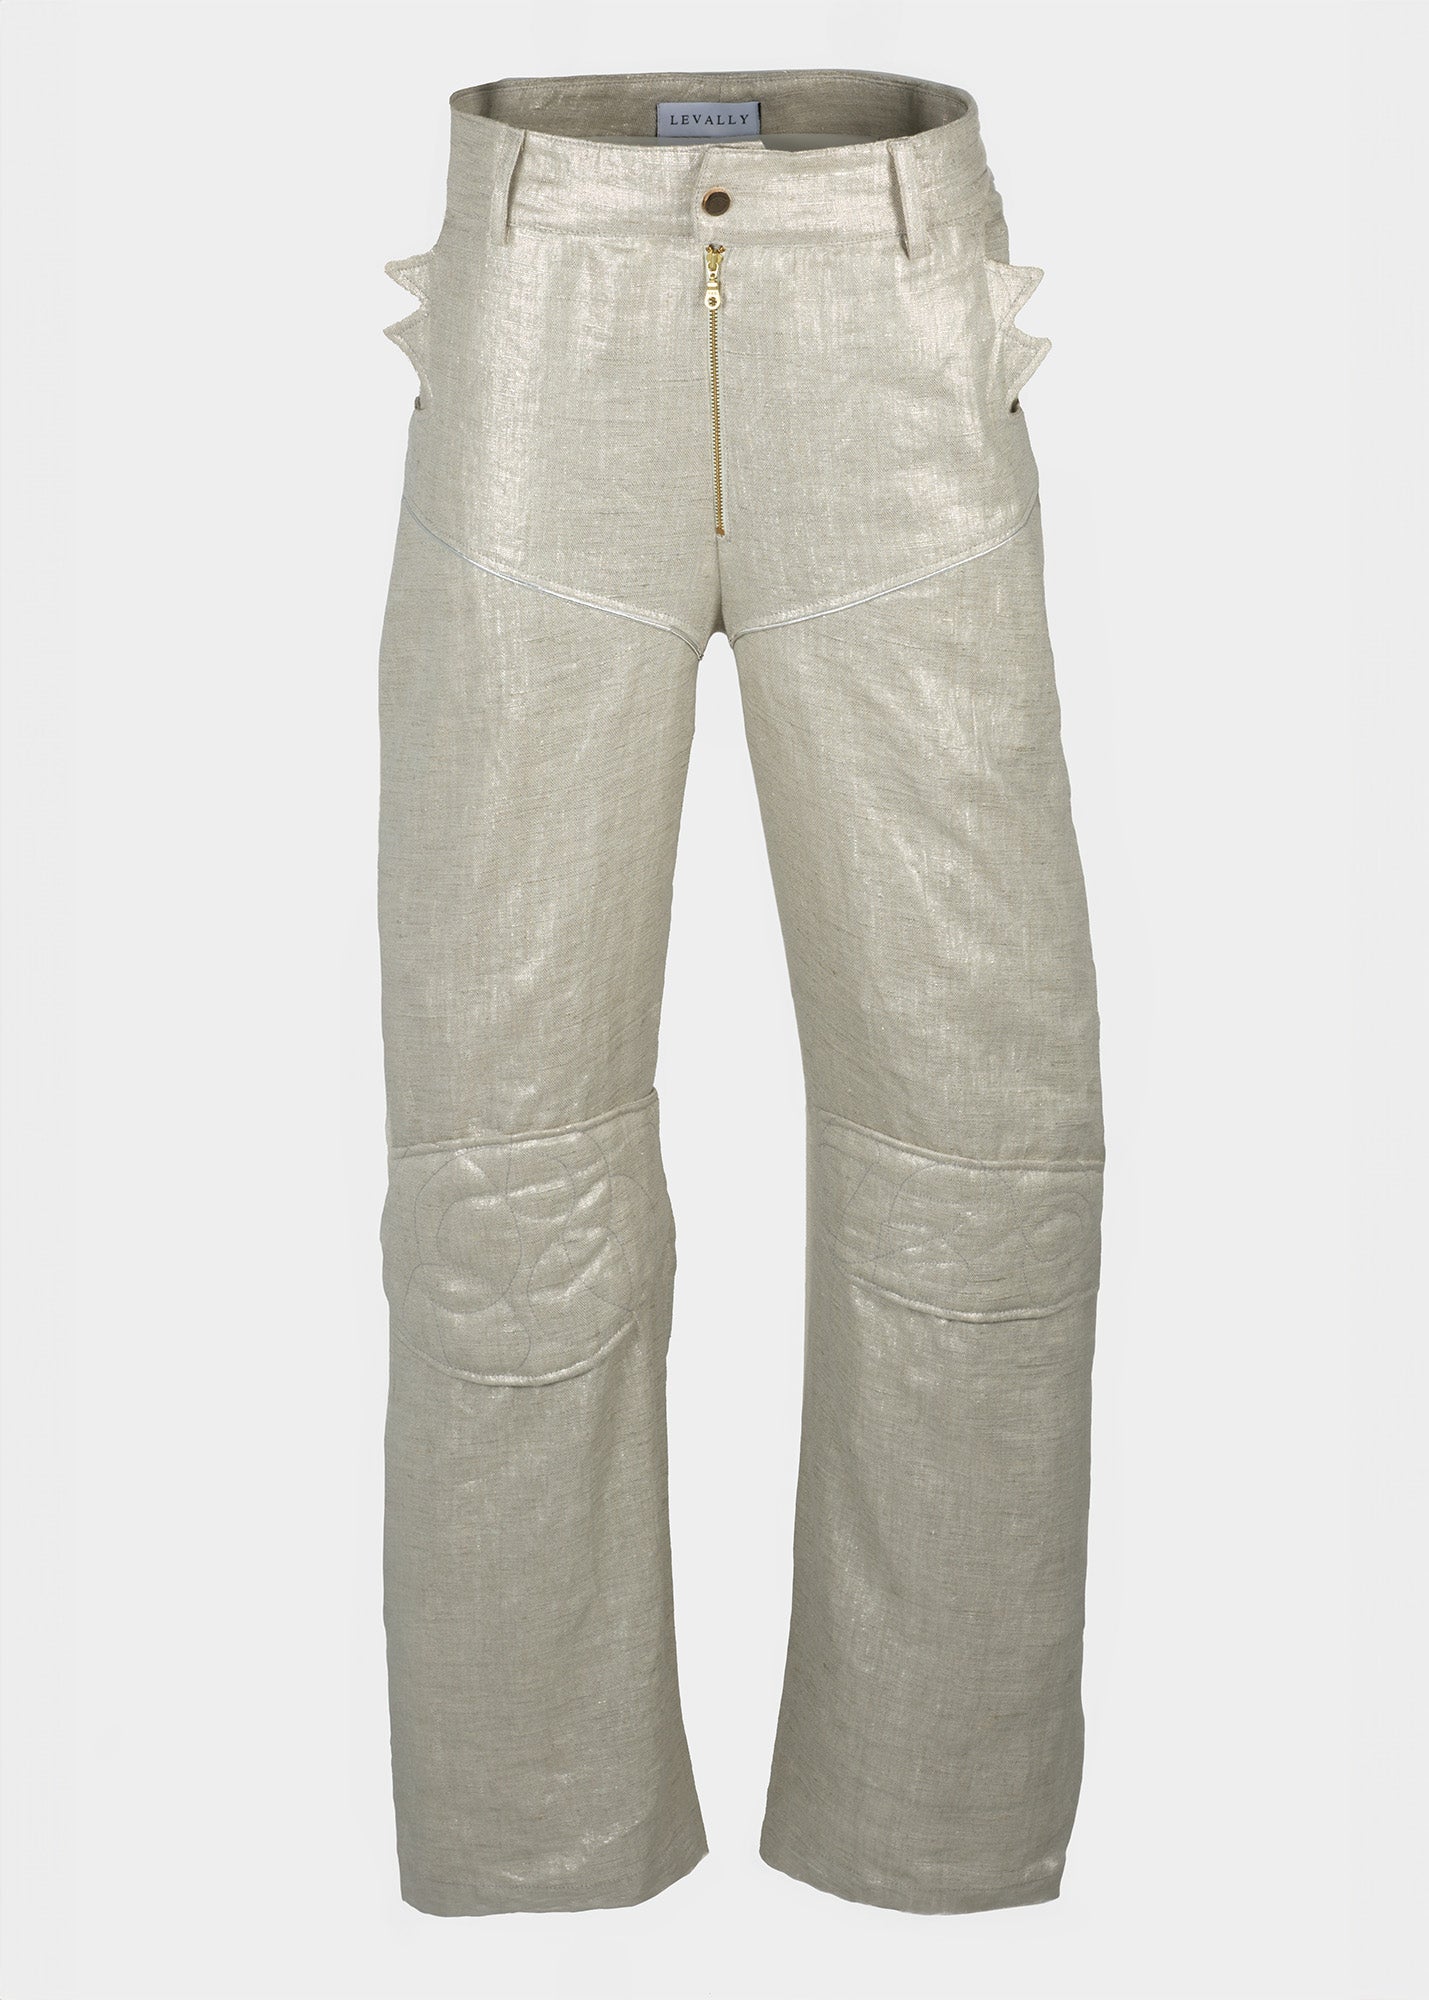 Levally Linen Motorcycle Pant